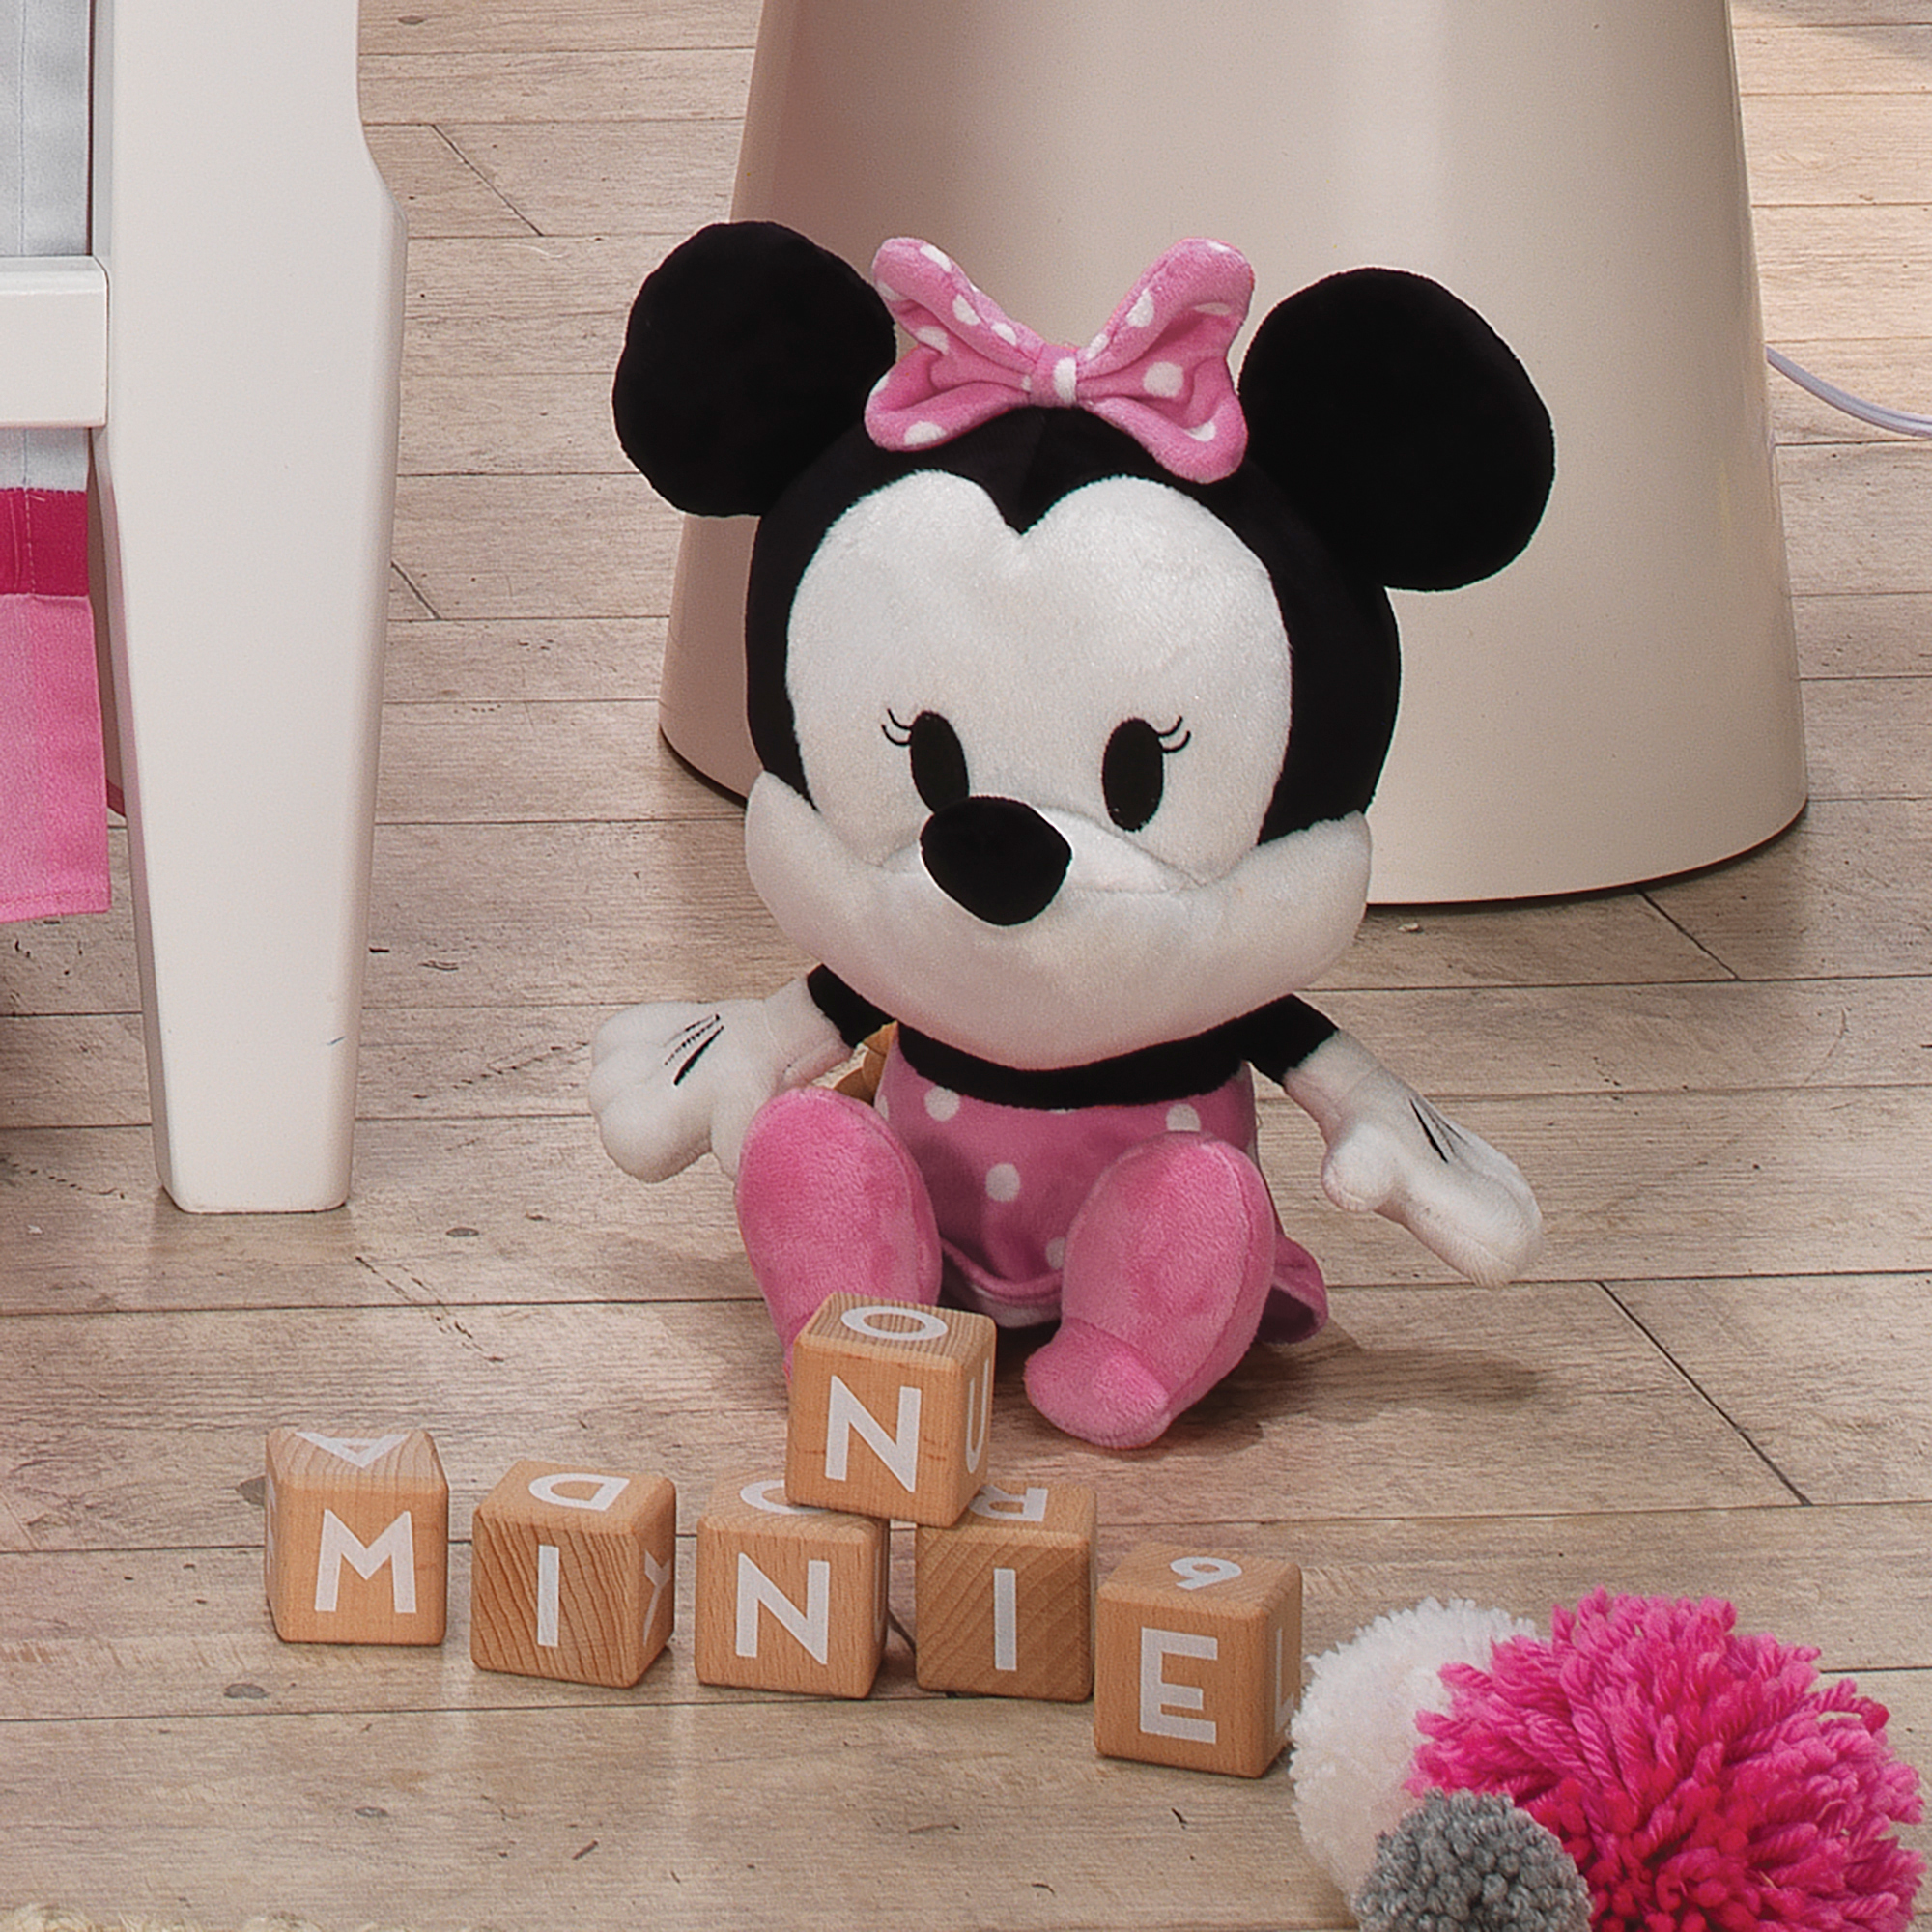 Disney Baby Minnie Mouse Plush Stuffed Animal Toy by Lambs & Ivy - image 3 of 4